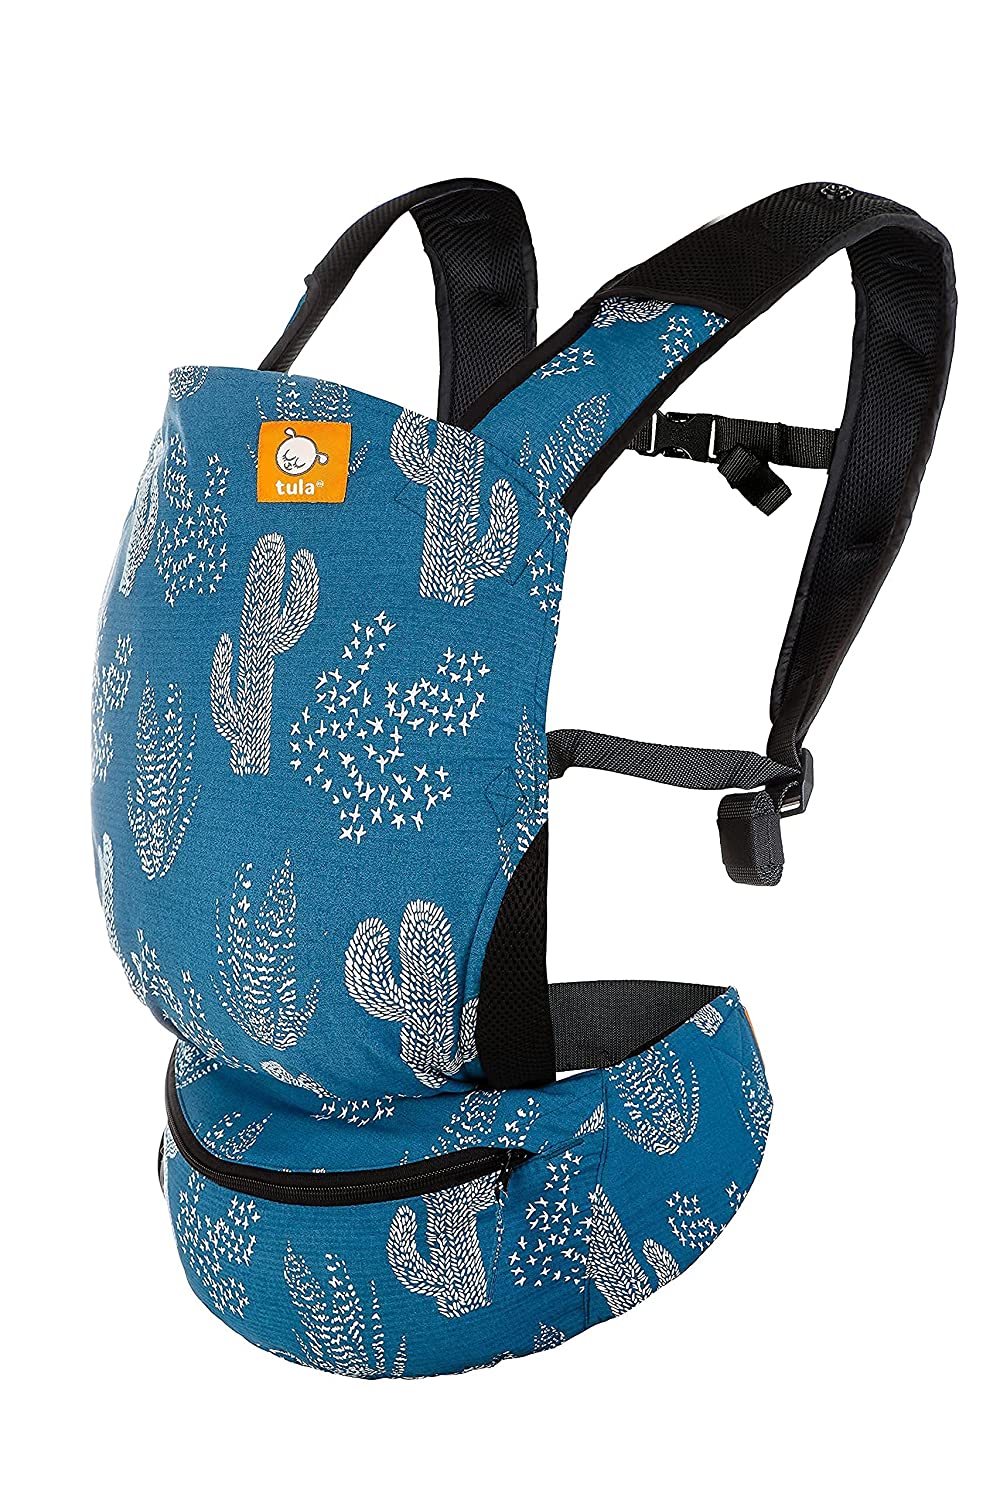 Tula Lite Baby Carrier and Baby Carrier Bag in One, Lightweight, Compact, Ergonomic, Belly Carrier, Back Carrier, Travel Baby Carrier (Ocotillo)